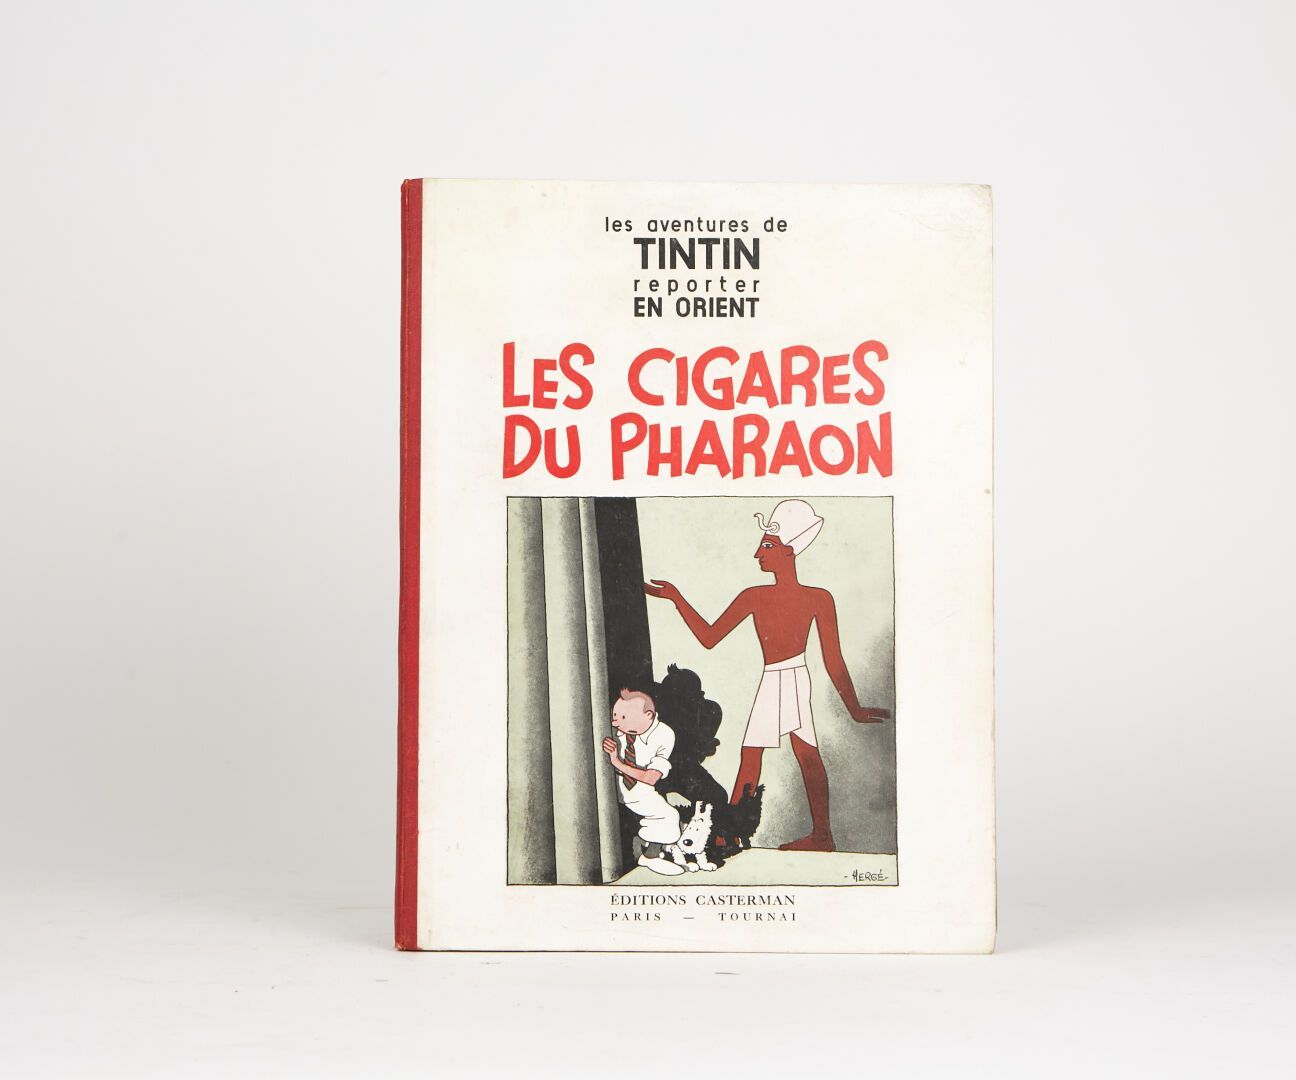 Null "The Cigars of the Pharaoh" 1934 The adventures of Tintin reporter in the E&hellip;